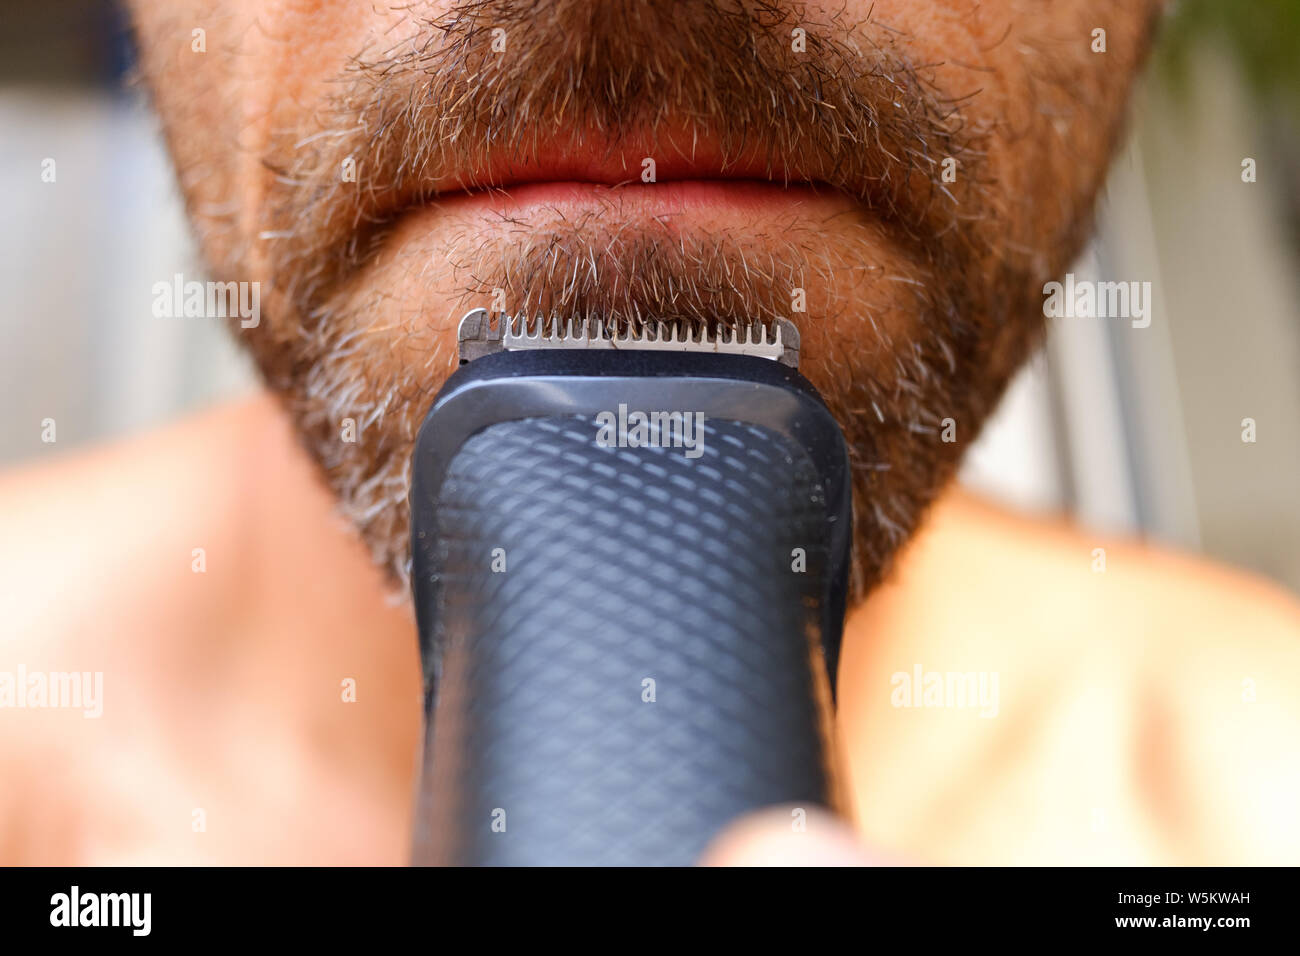 using hair clippers to trim beard